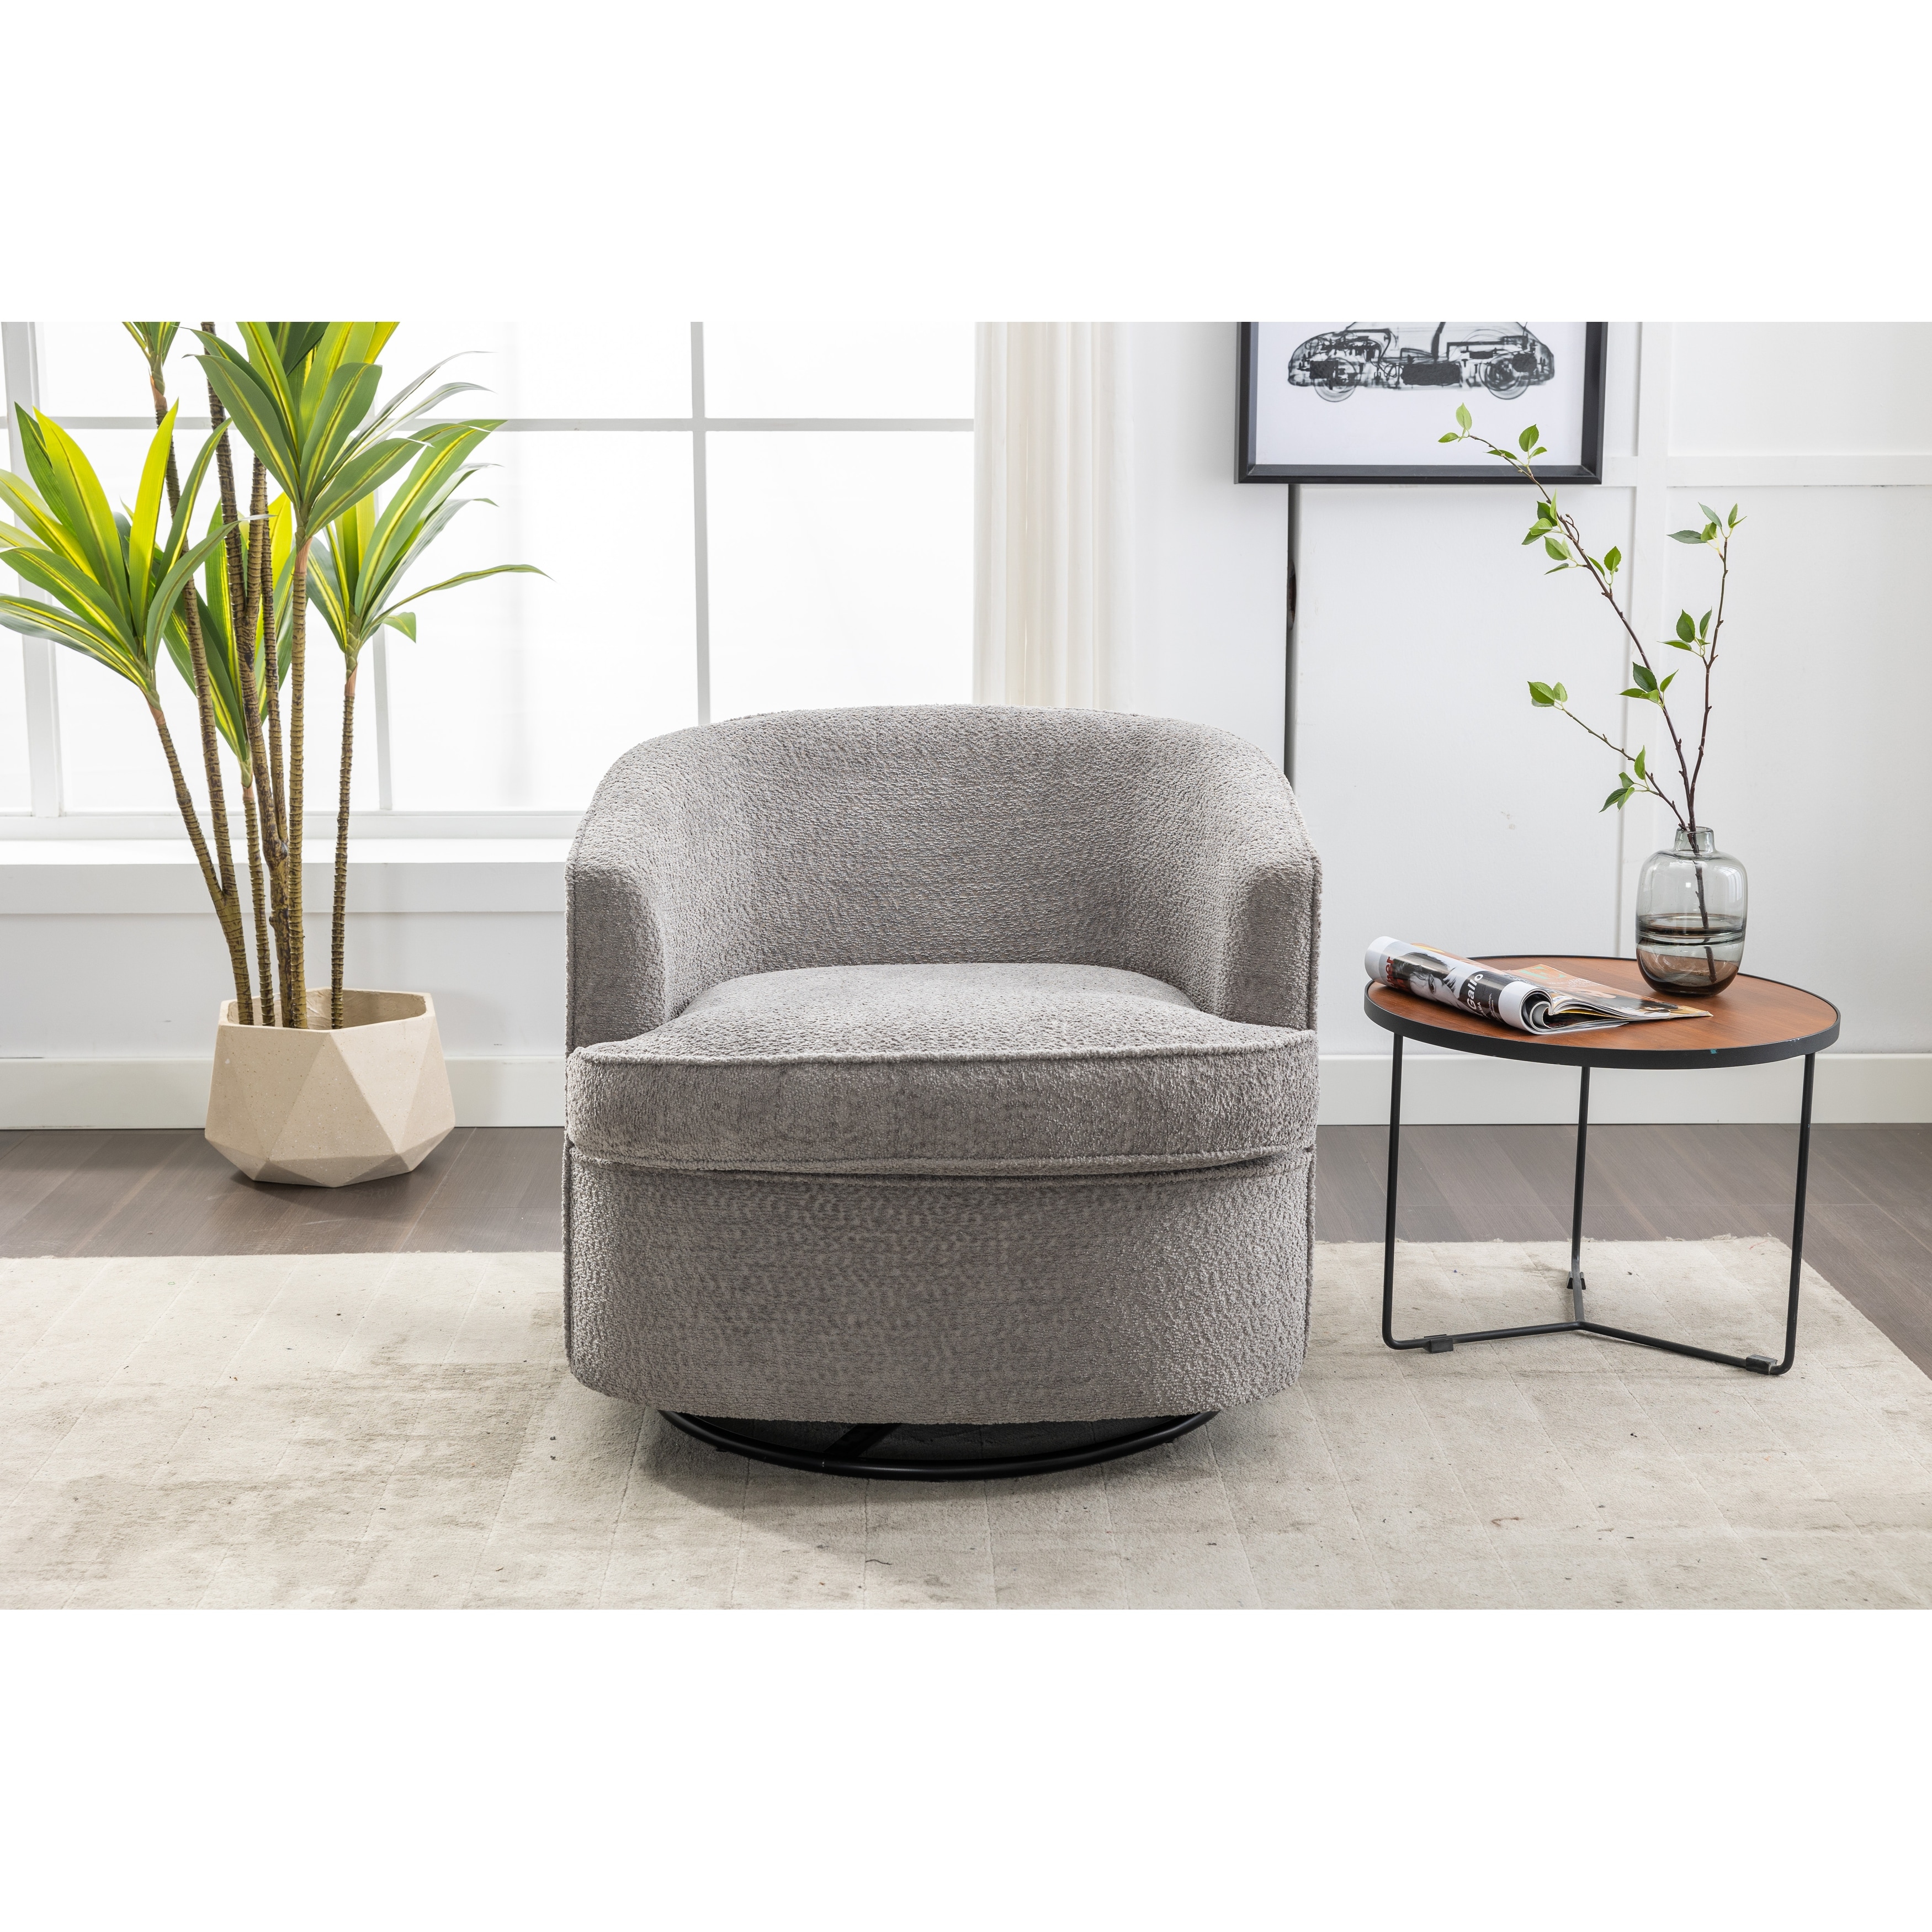 Swivel Barrel Chair Comfy Round Accent Sofa Chair 360? Swivel Barrel Club Chair Leisure Arm Chair for Living Room Office